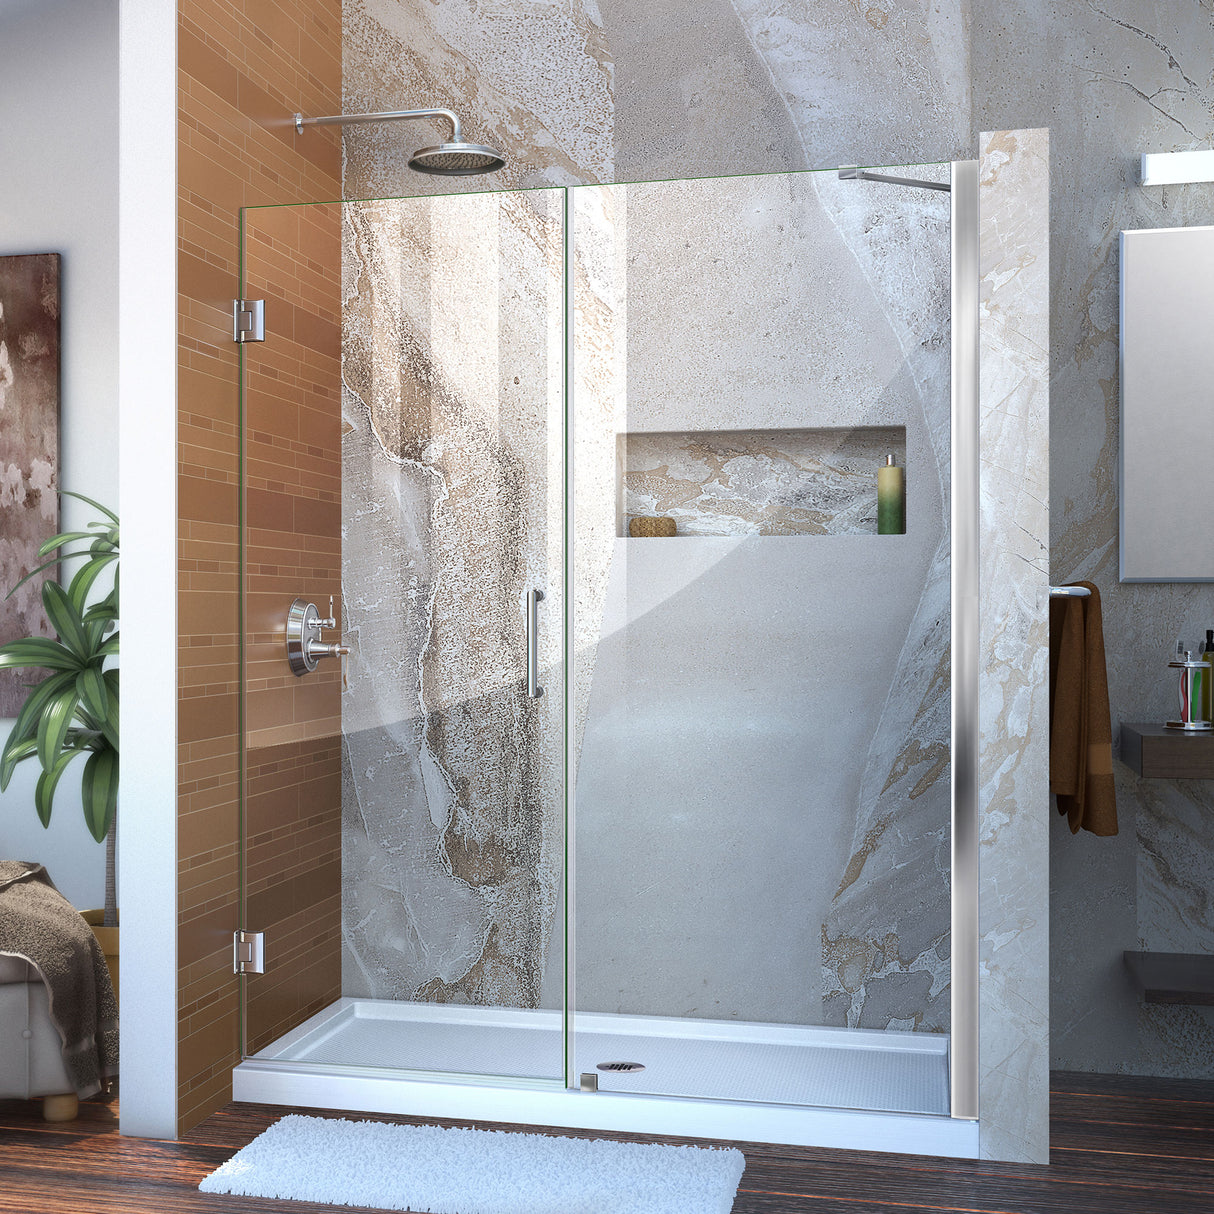 DreamLine Unidoor 59-60 in. W x 72 in. H Frameless Hinged Shower Door with Support Arm in Chrome